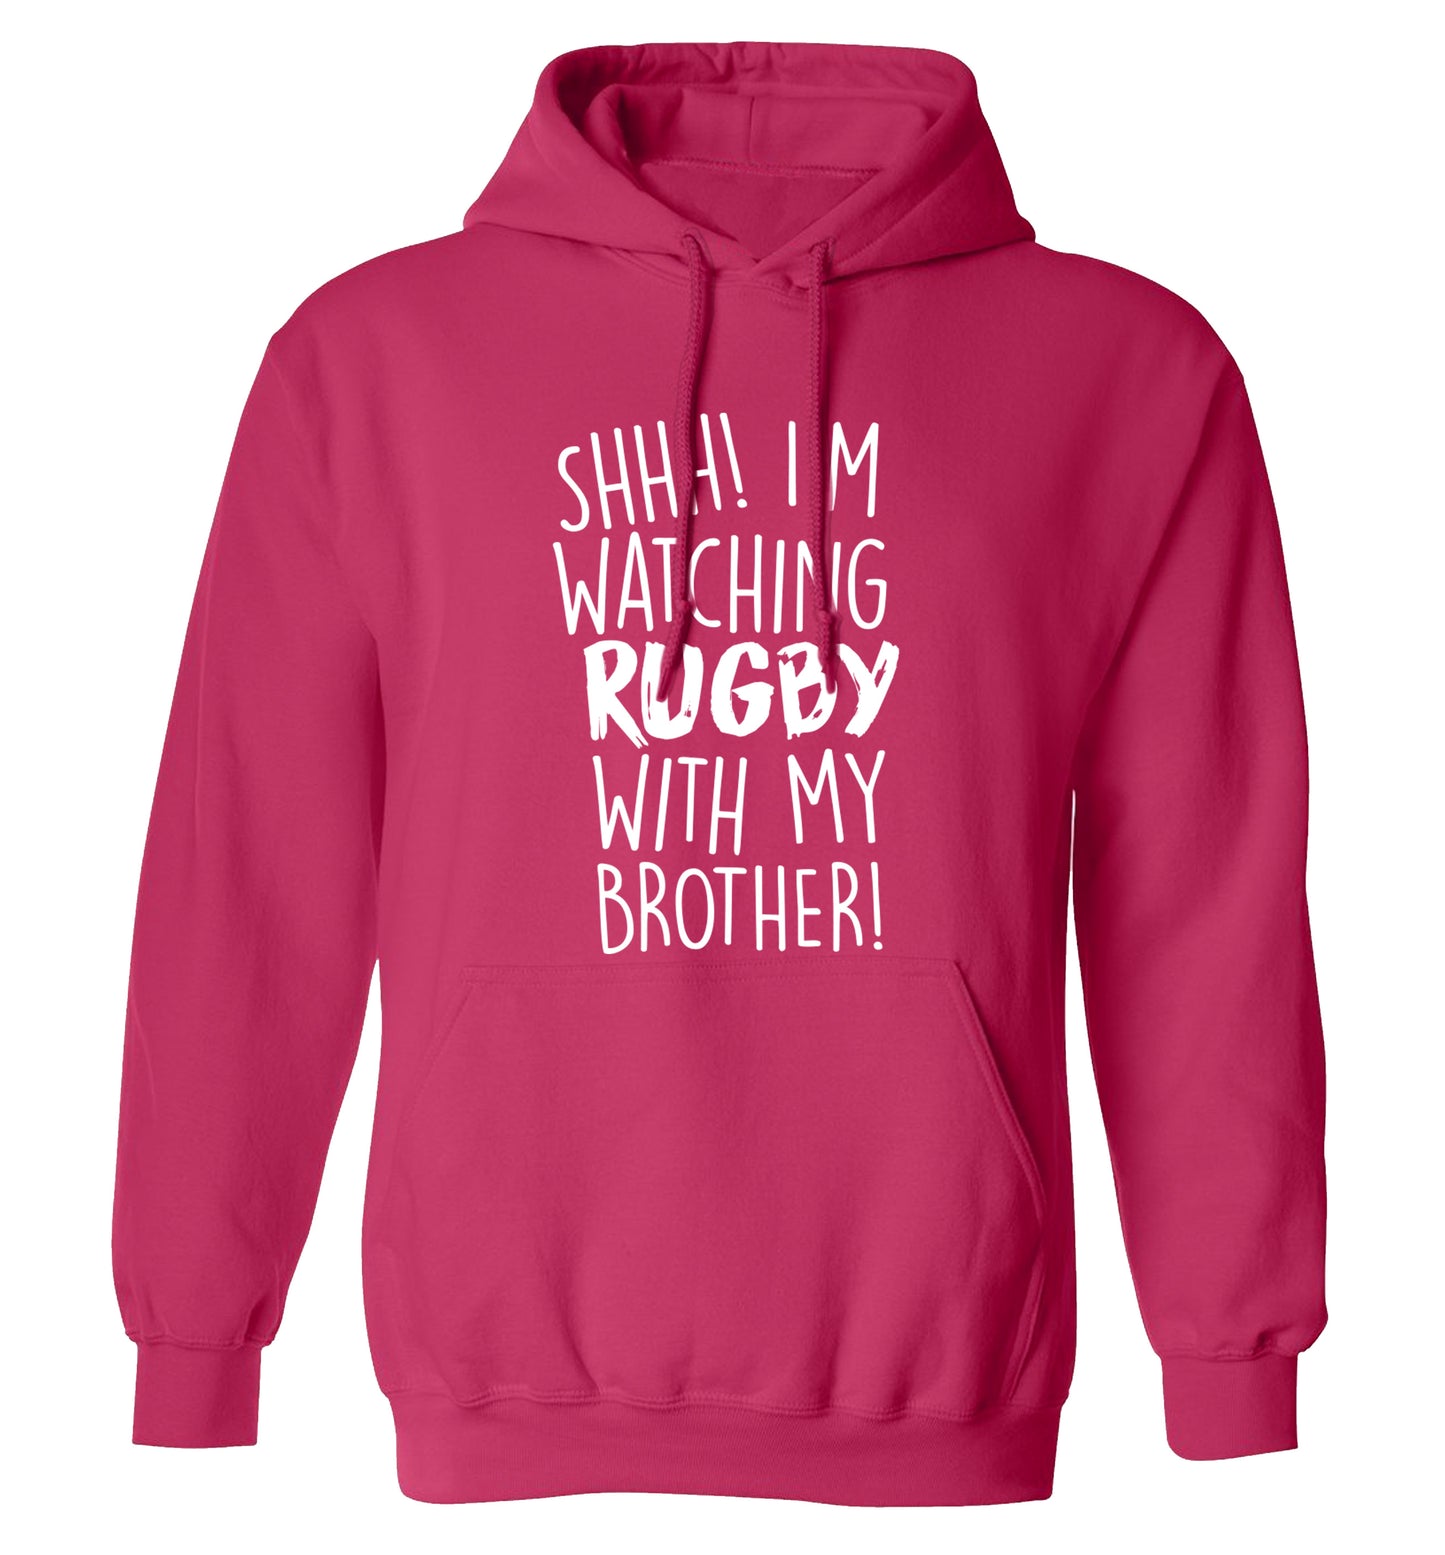 Shh... I'm watching rugby with my brother adults unisex pink hoodie 2XL